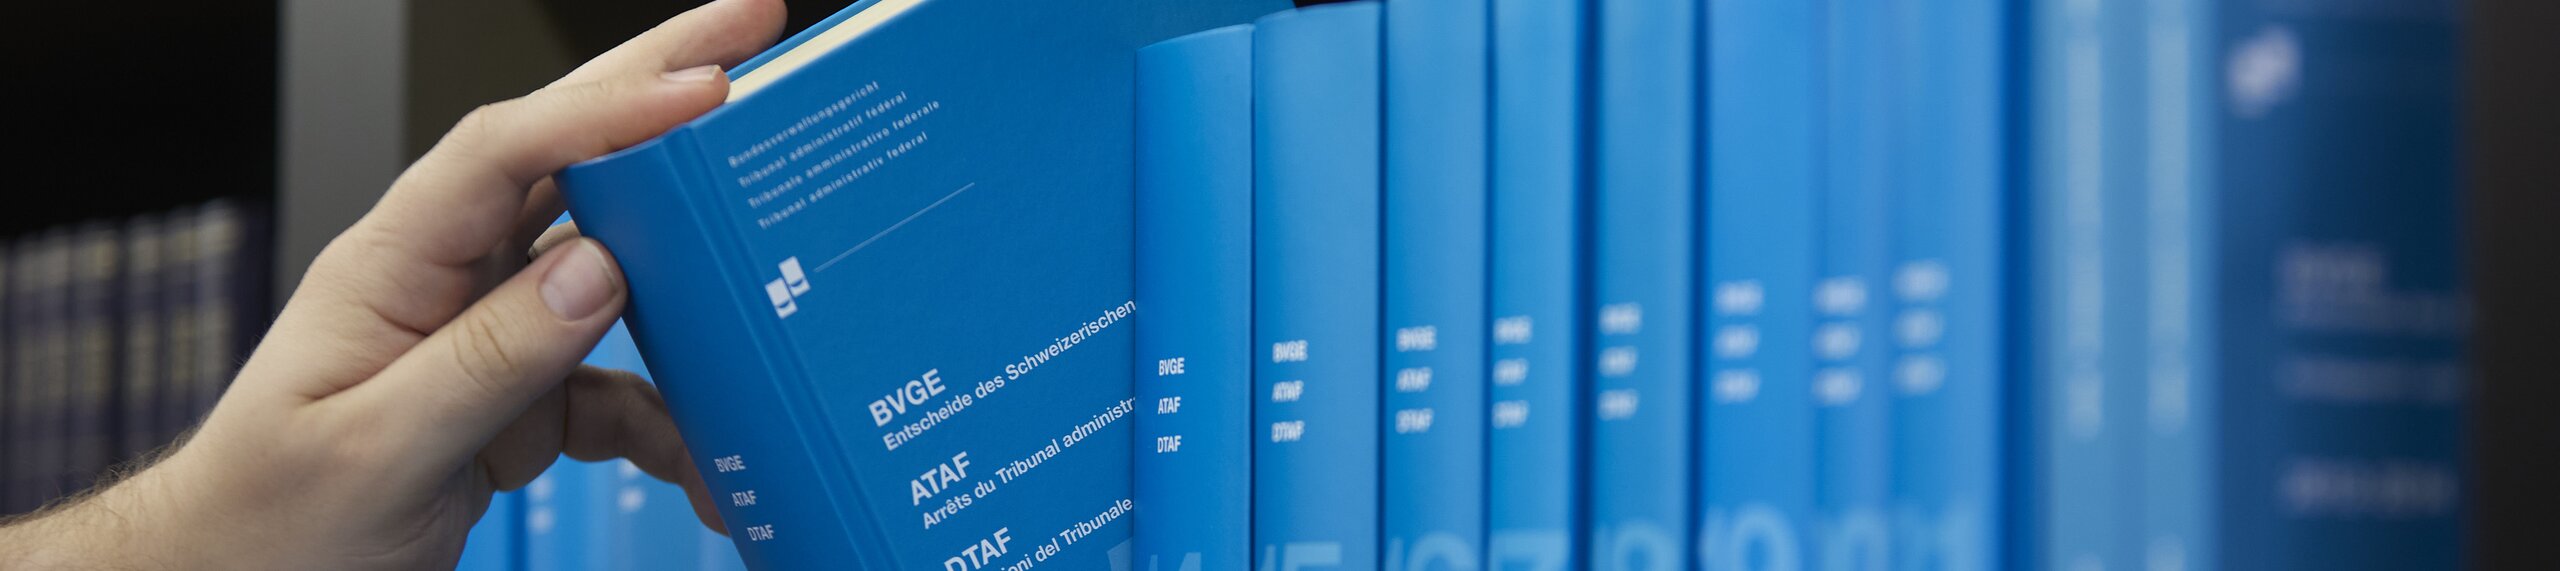 Decisions of the Federal Administrative Court Bulletin on shelf